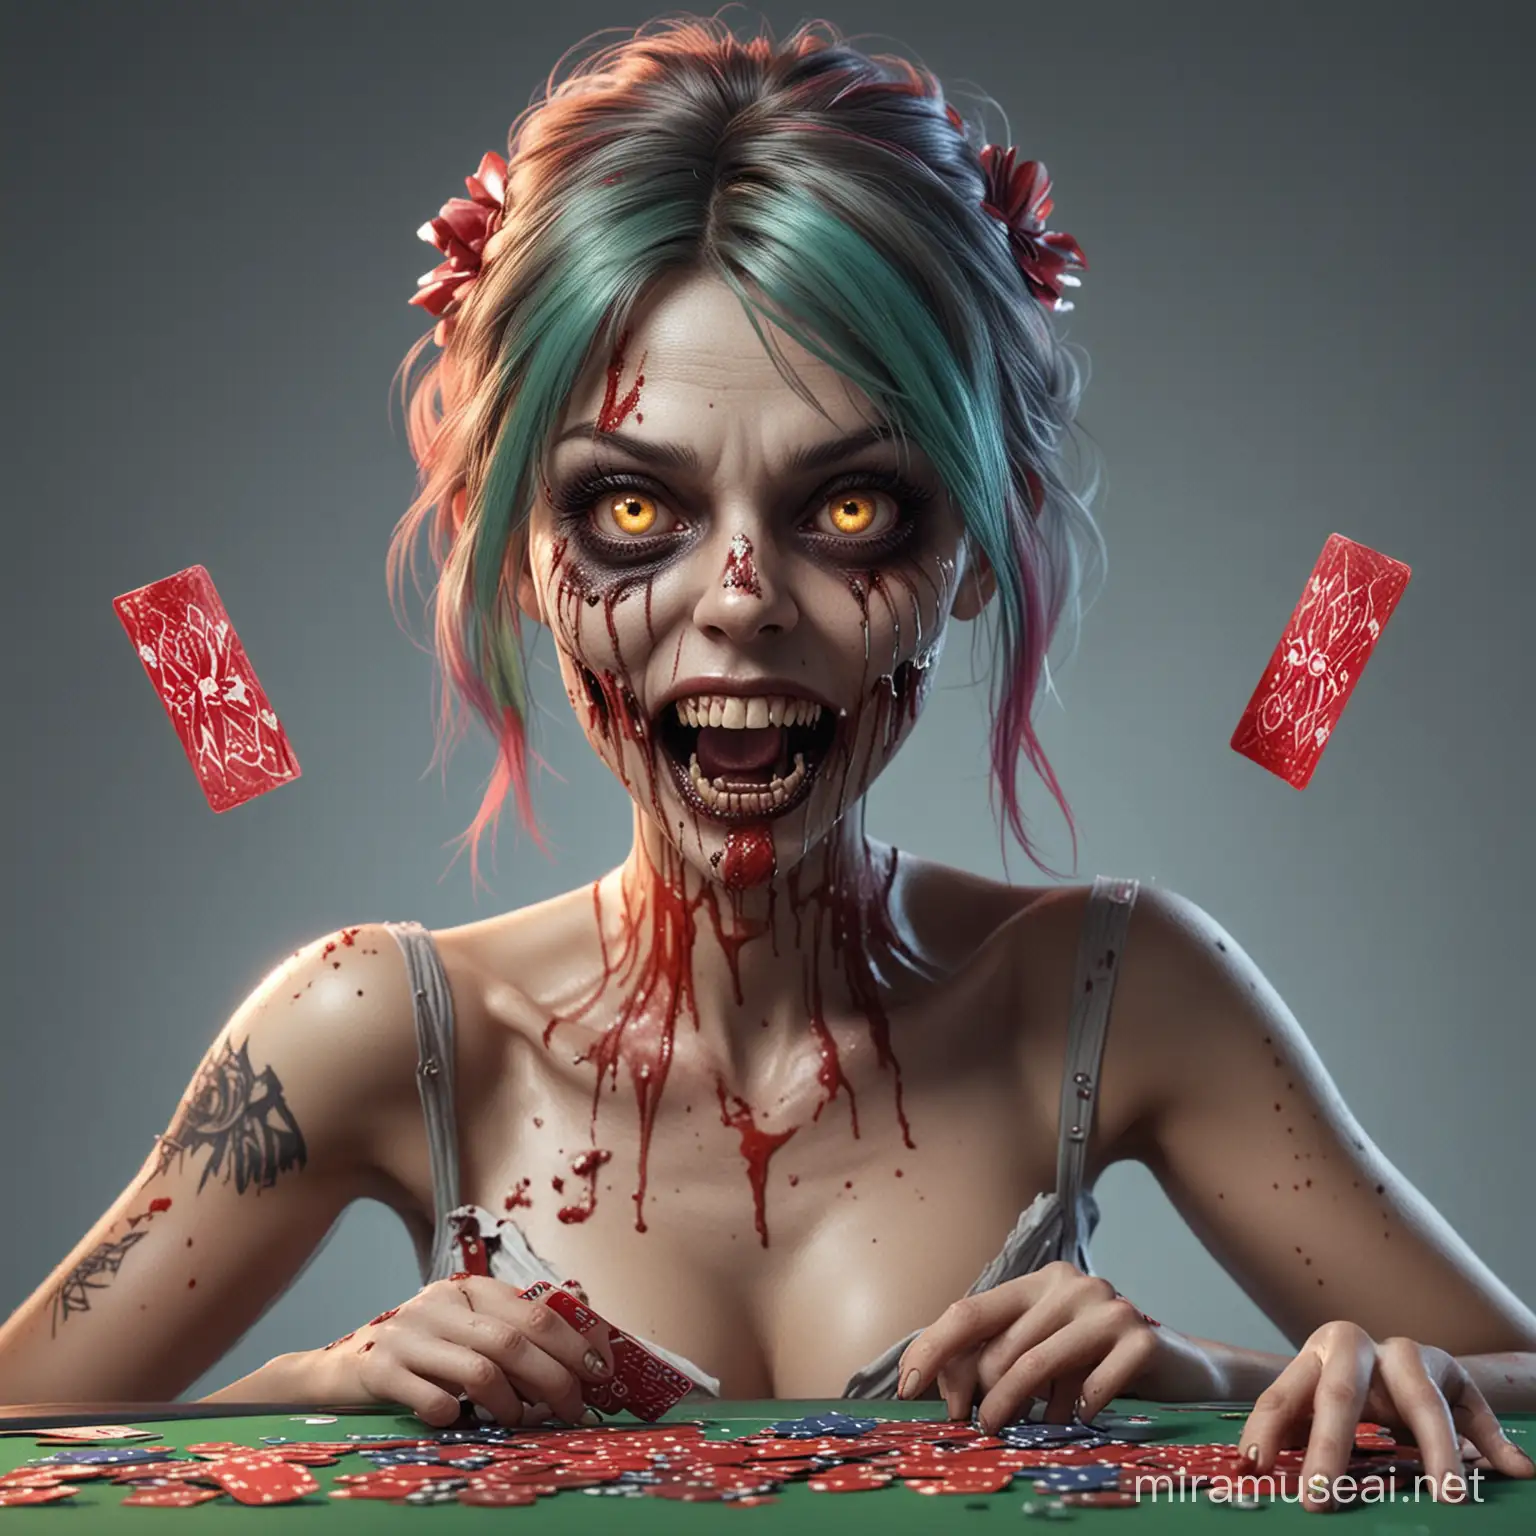 Spitting poker cards, zombie girl, beautiful, cute, colorful, vibrant, 3d render